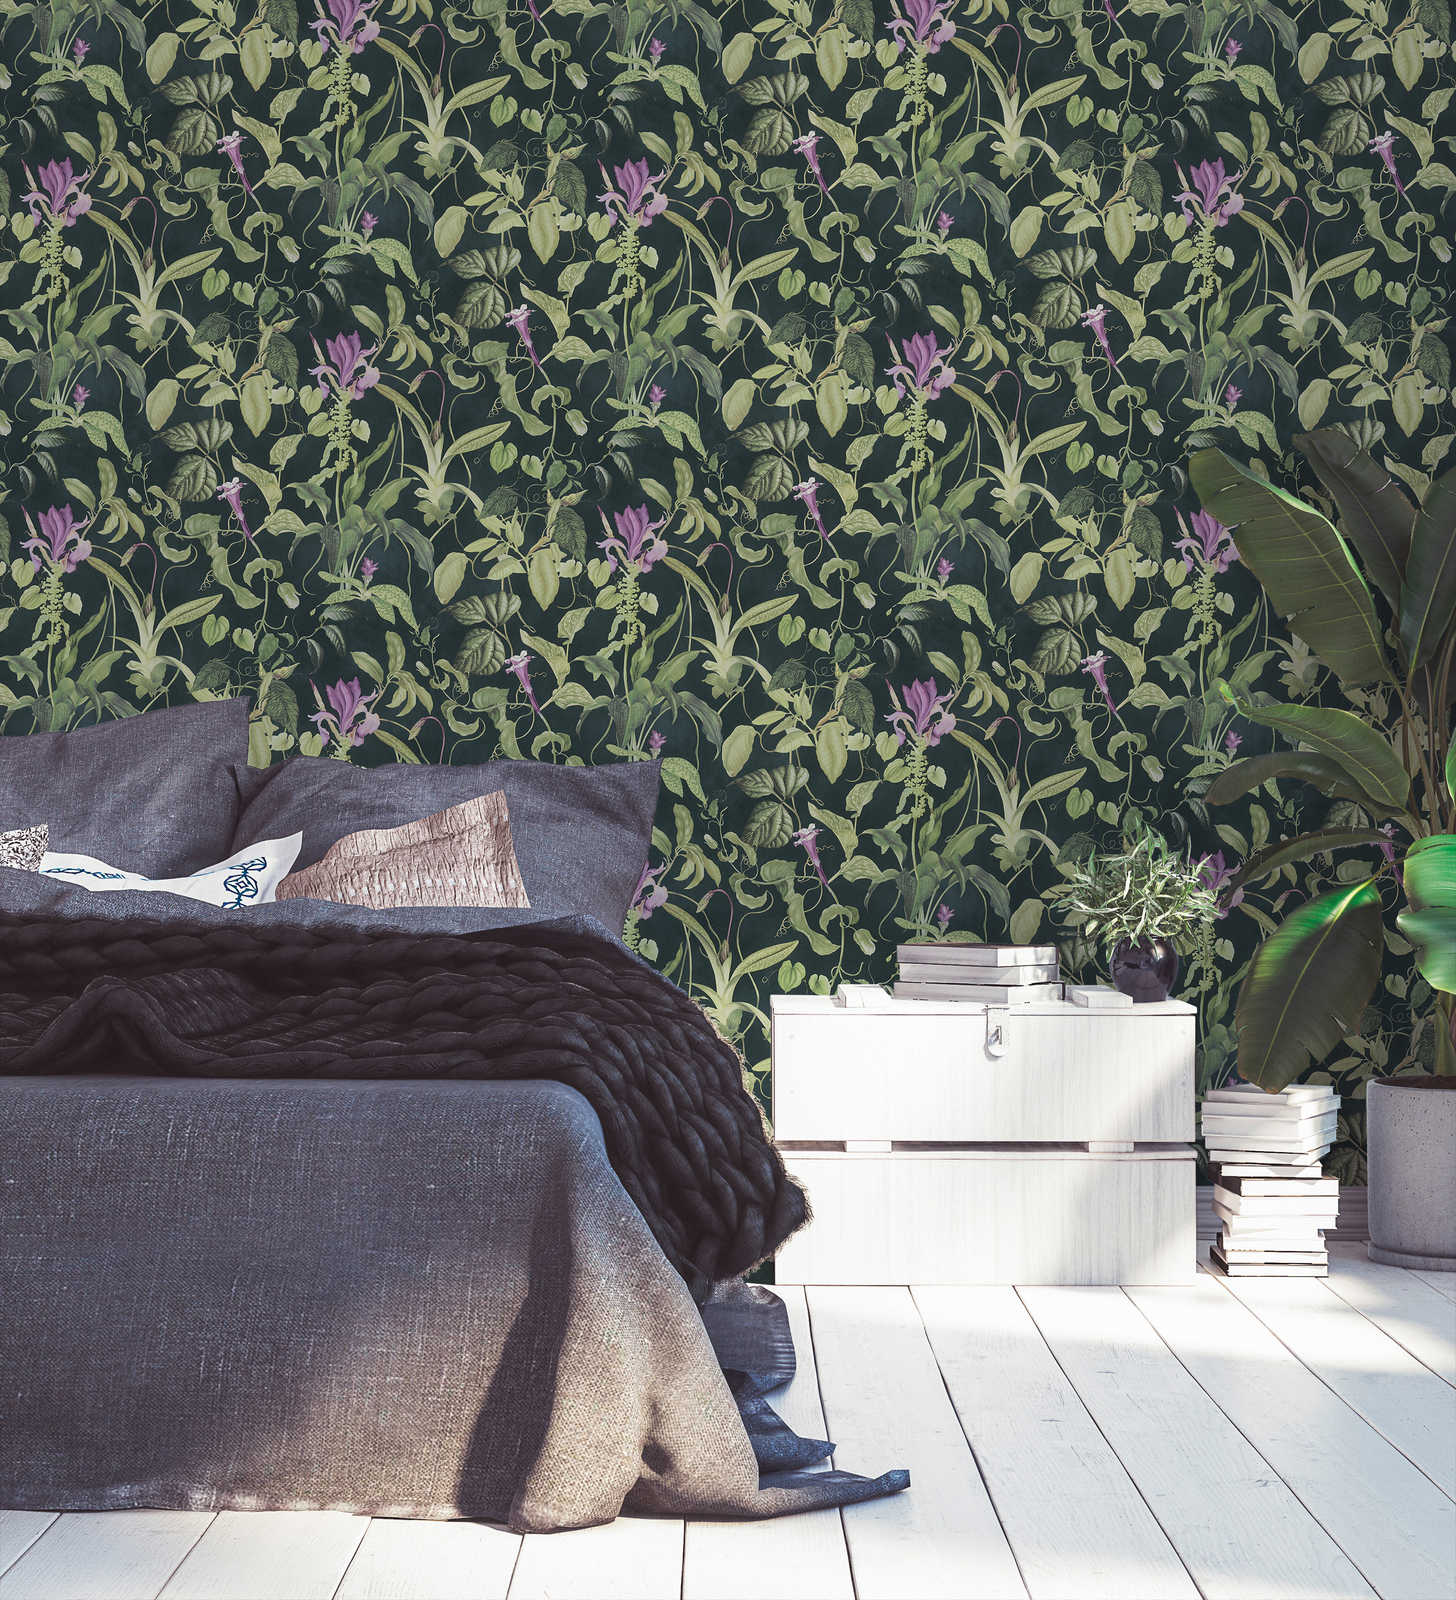             Tropical floral wallpaper Design by MICHALSKY - Green, Black
        